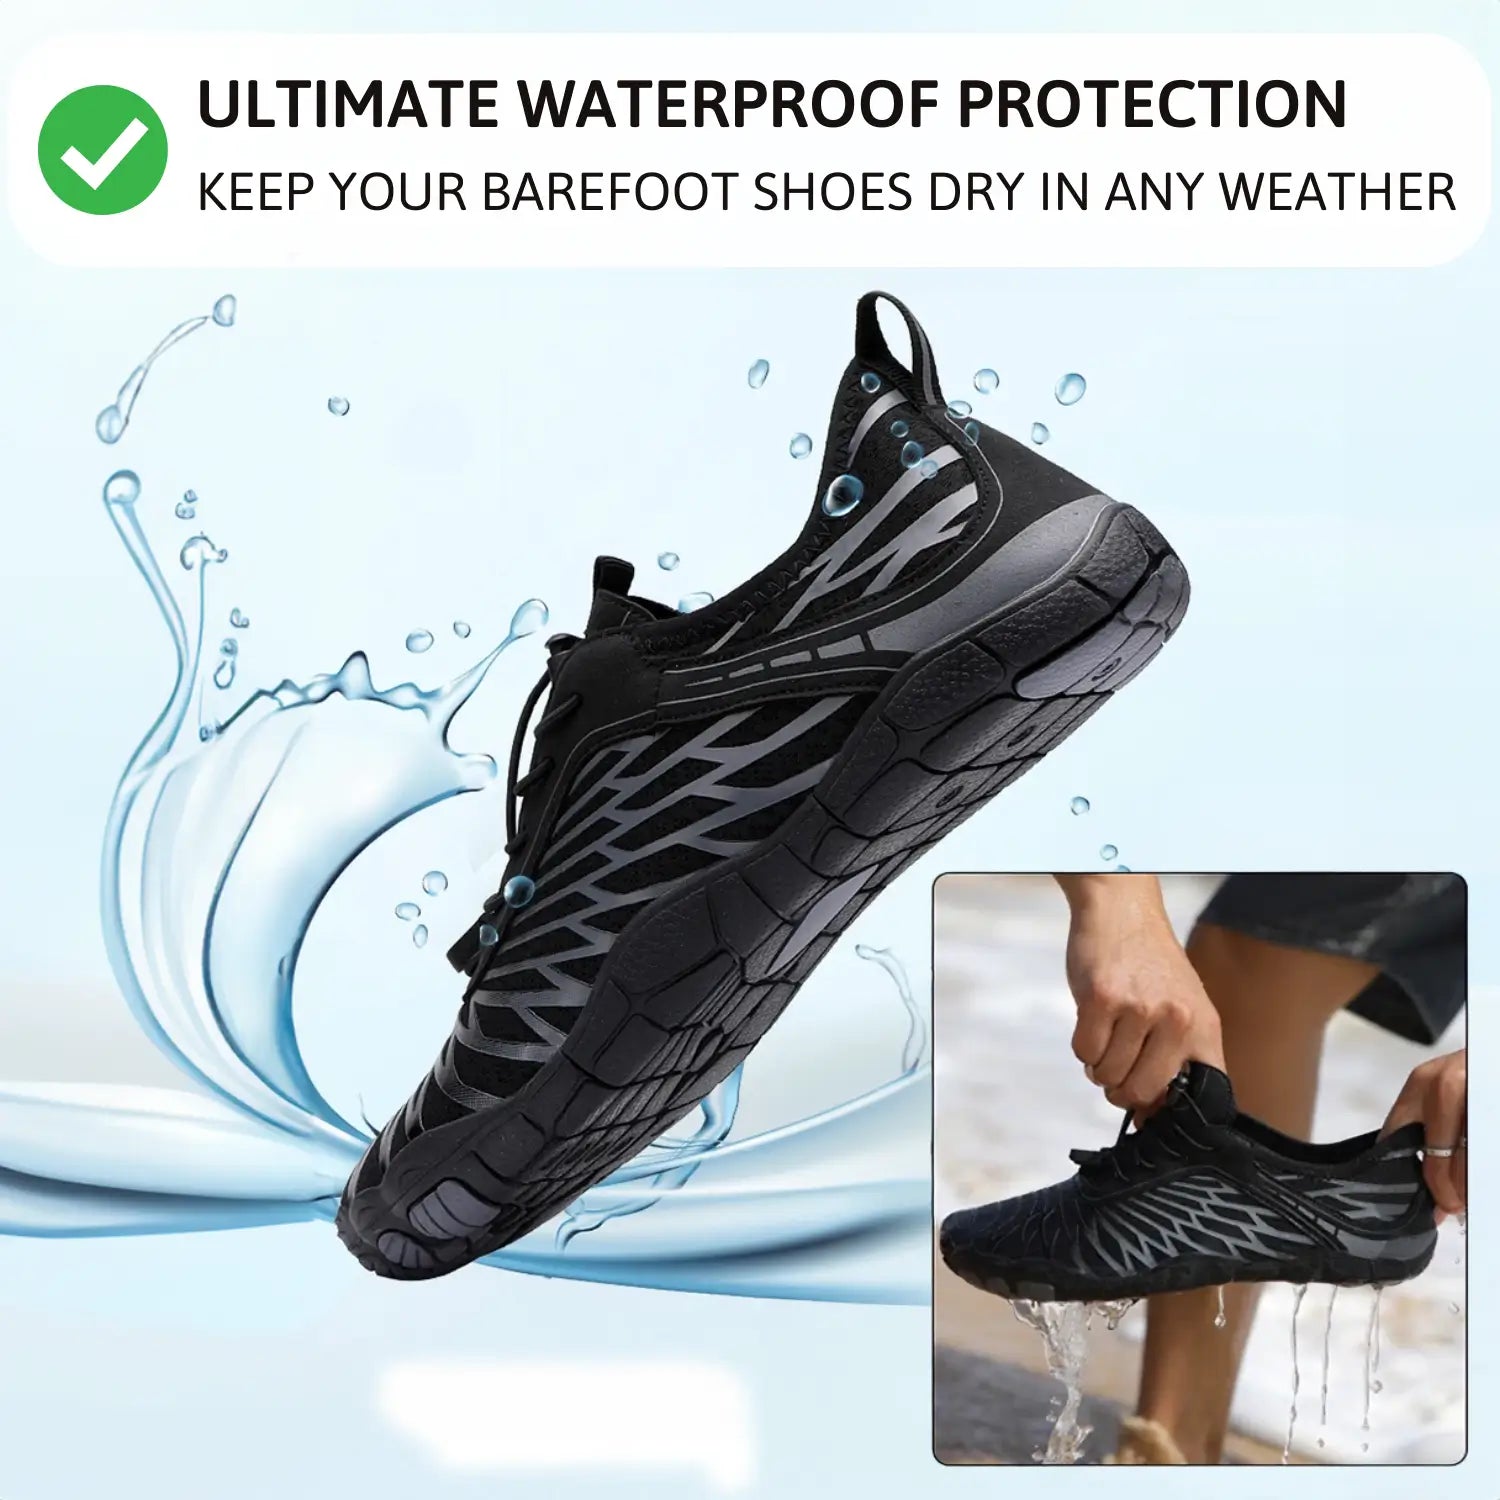 Waterproof Layer - Applied by us (98.7% Protection)